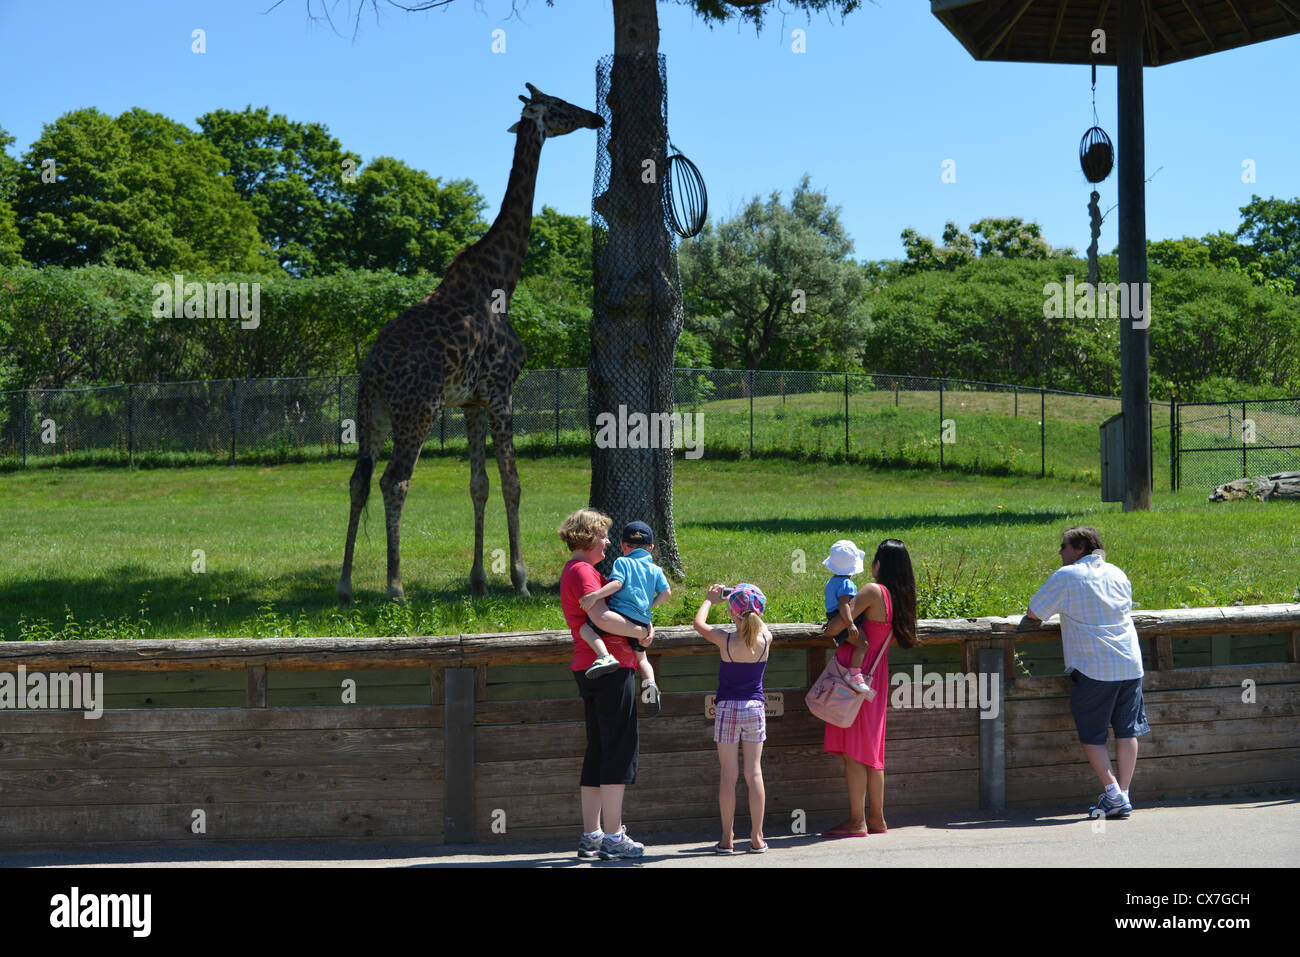 This is an image of a Giraffe at the Toronto zoo Stock Photo